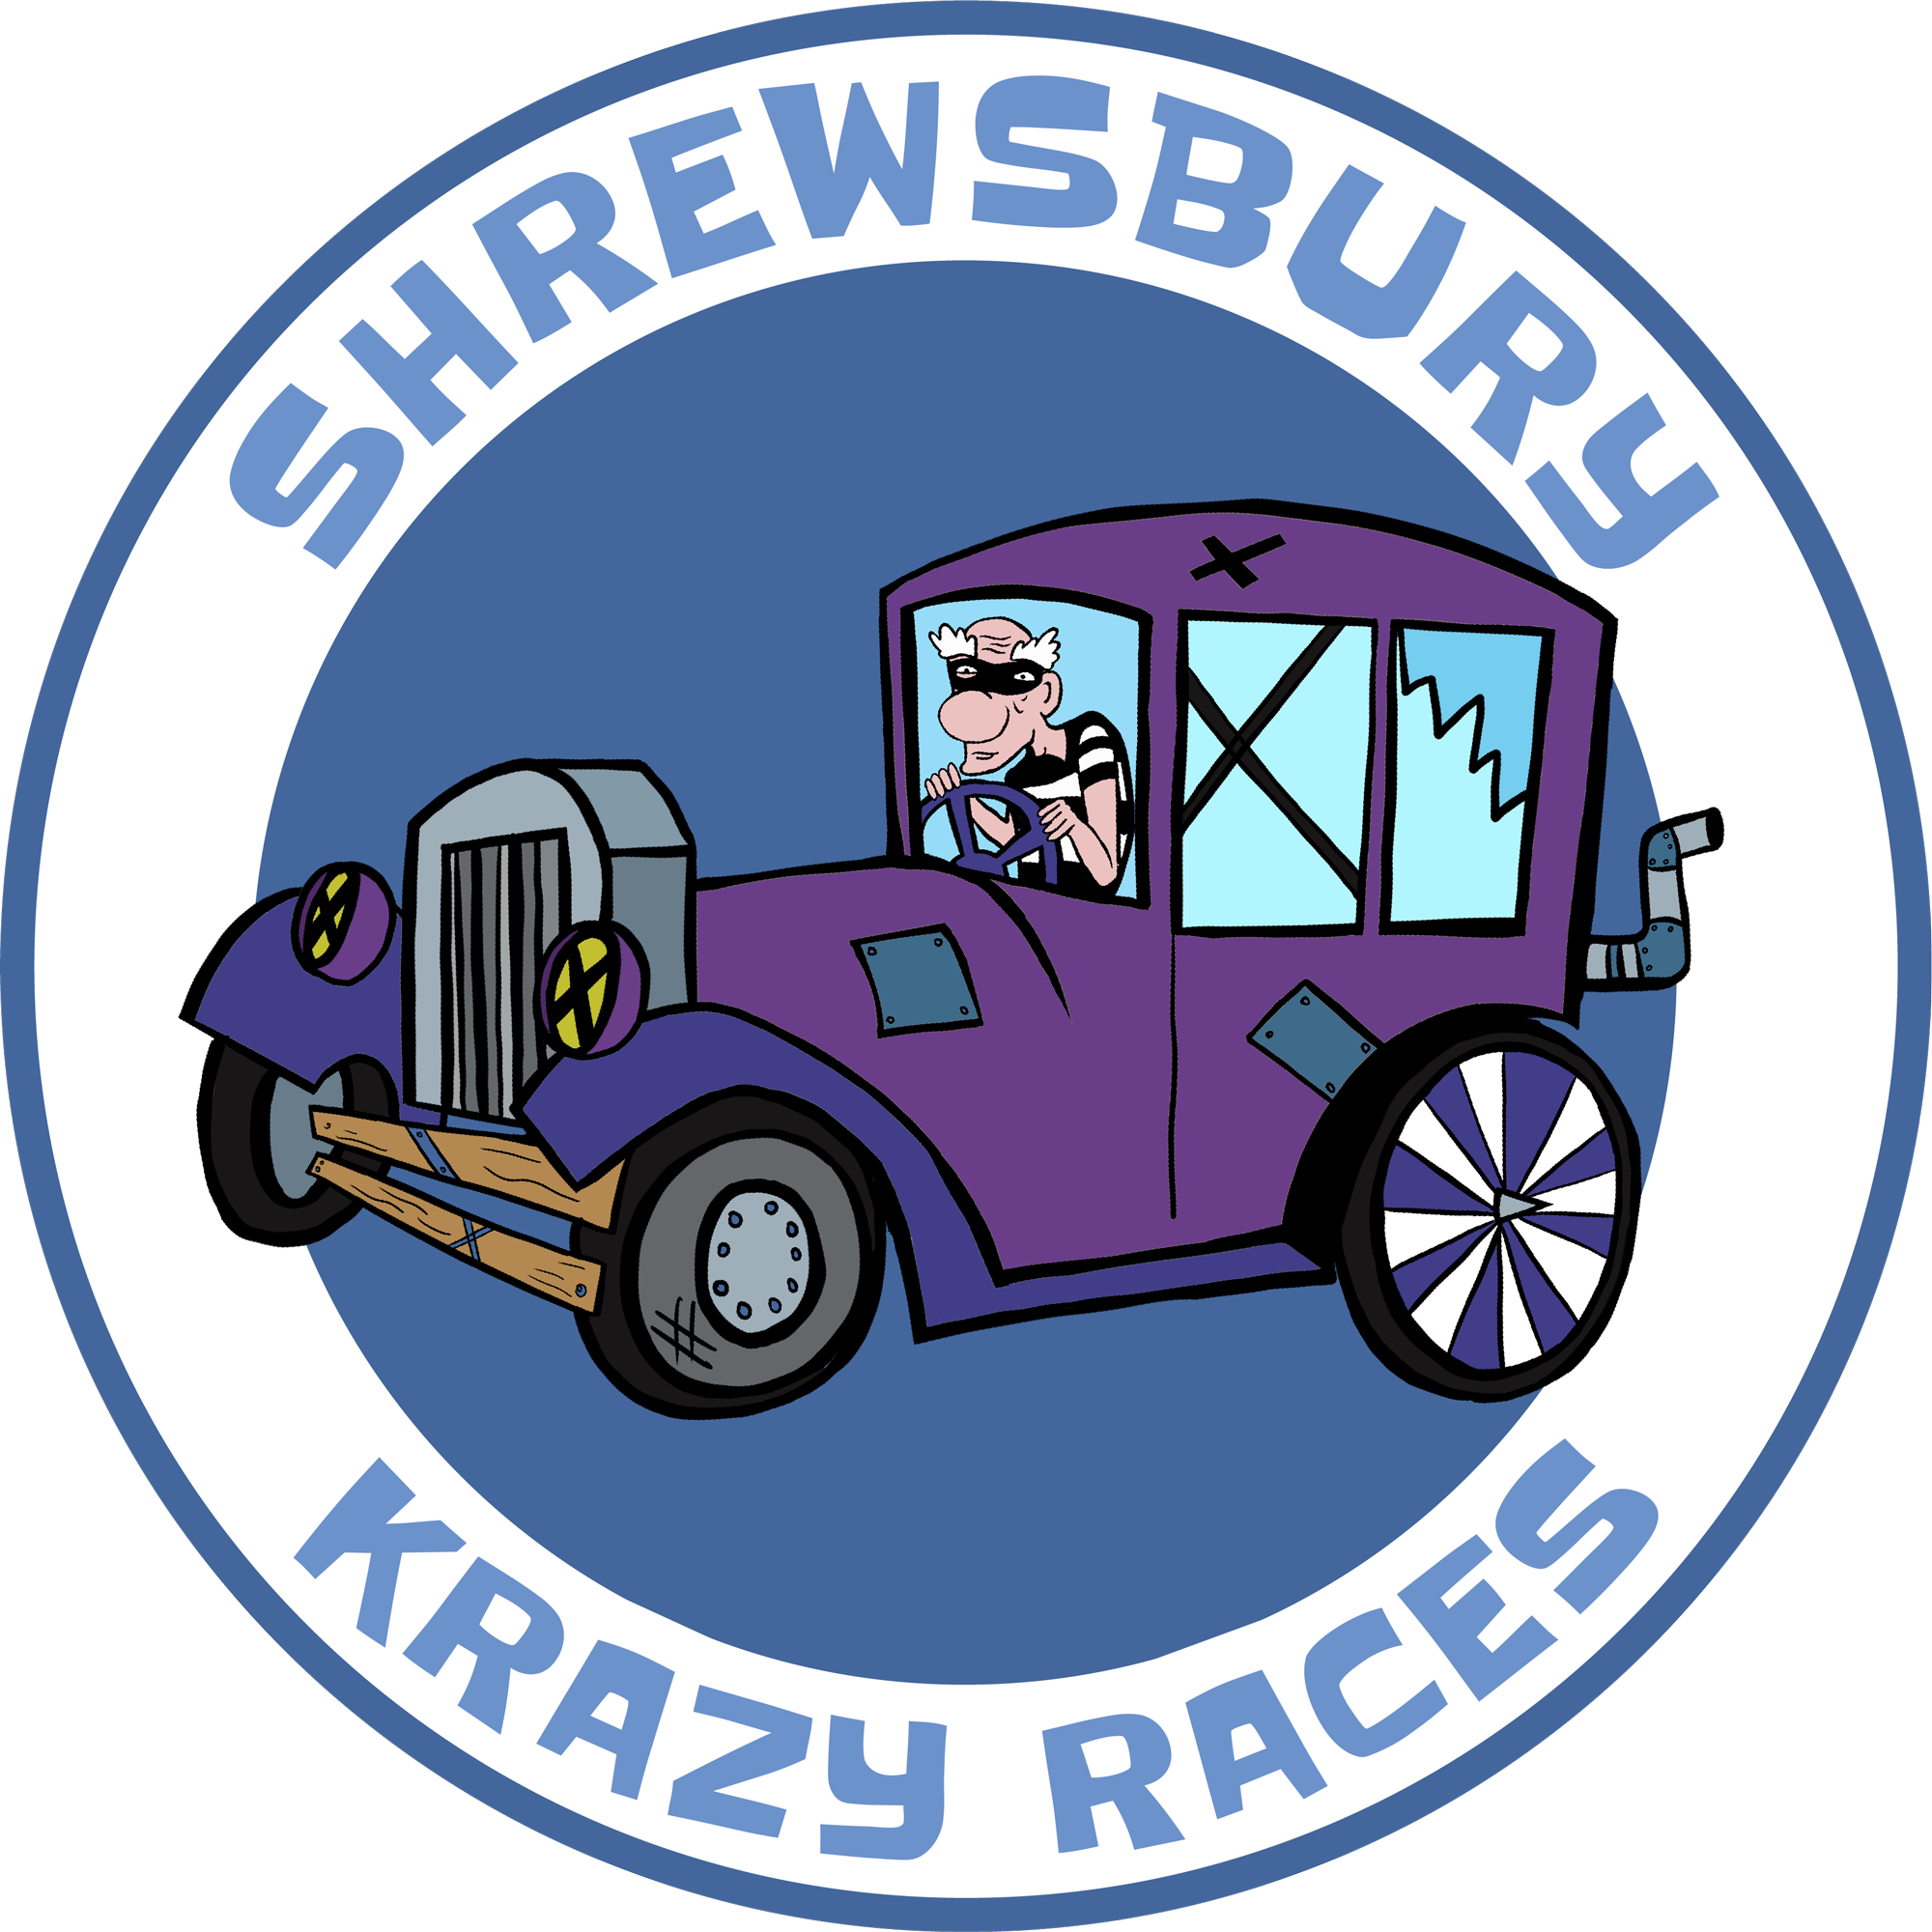 The race is on to sign up now for the wackiest event to be held in Shrewsbury